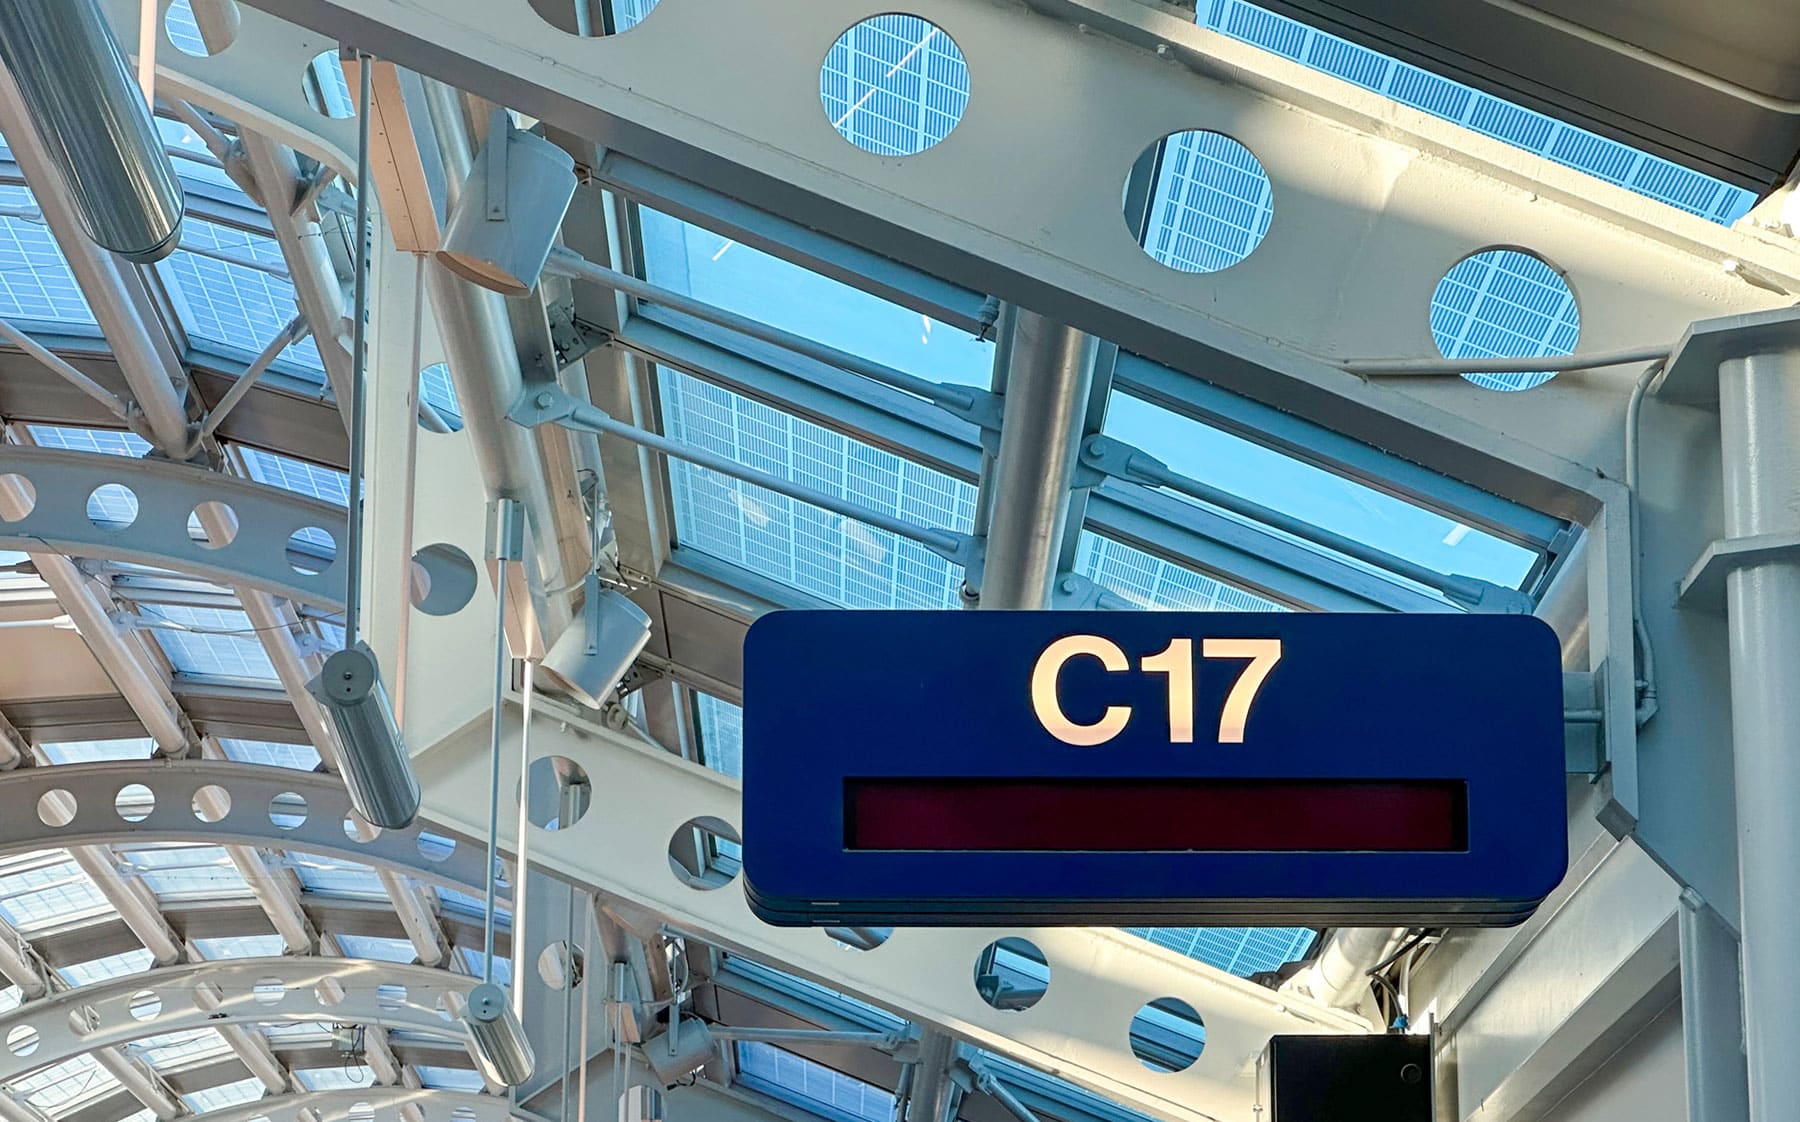 Gate C17 sign at O'Hare Airport